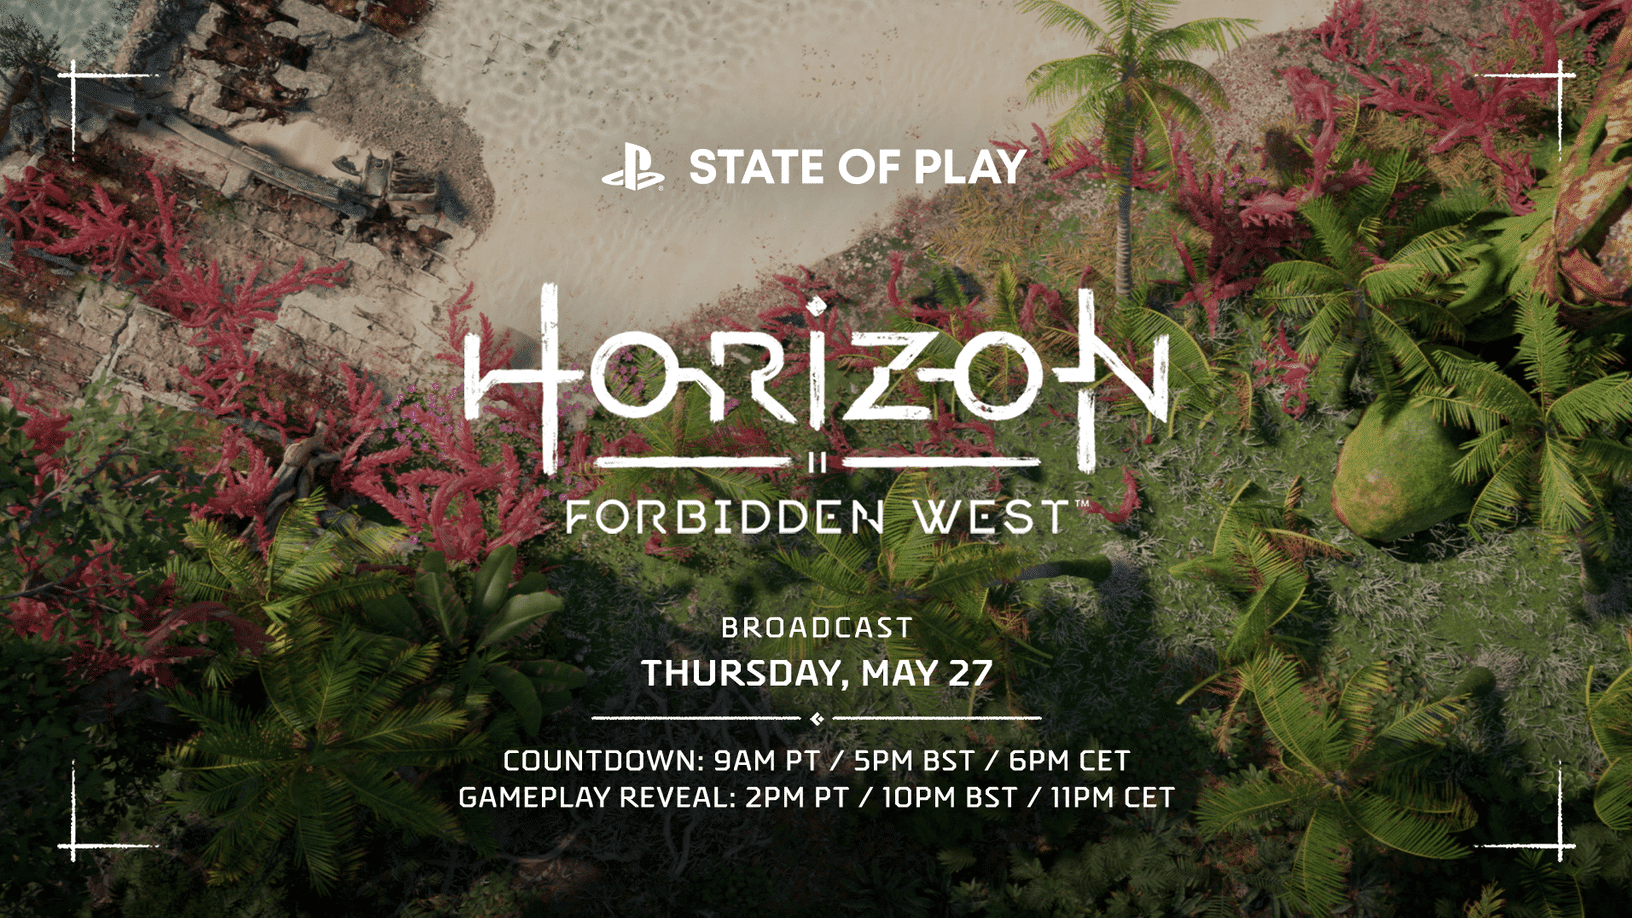 State of Play Scheduled for This Thursday to Show Horizon Forbidden West Gameplay